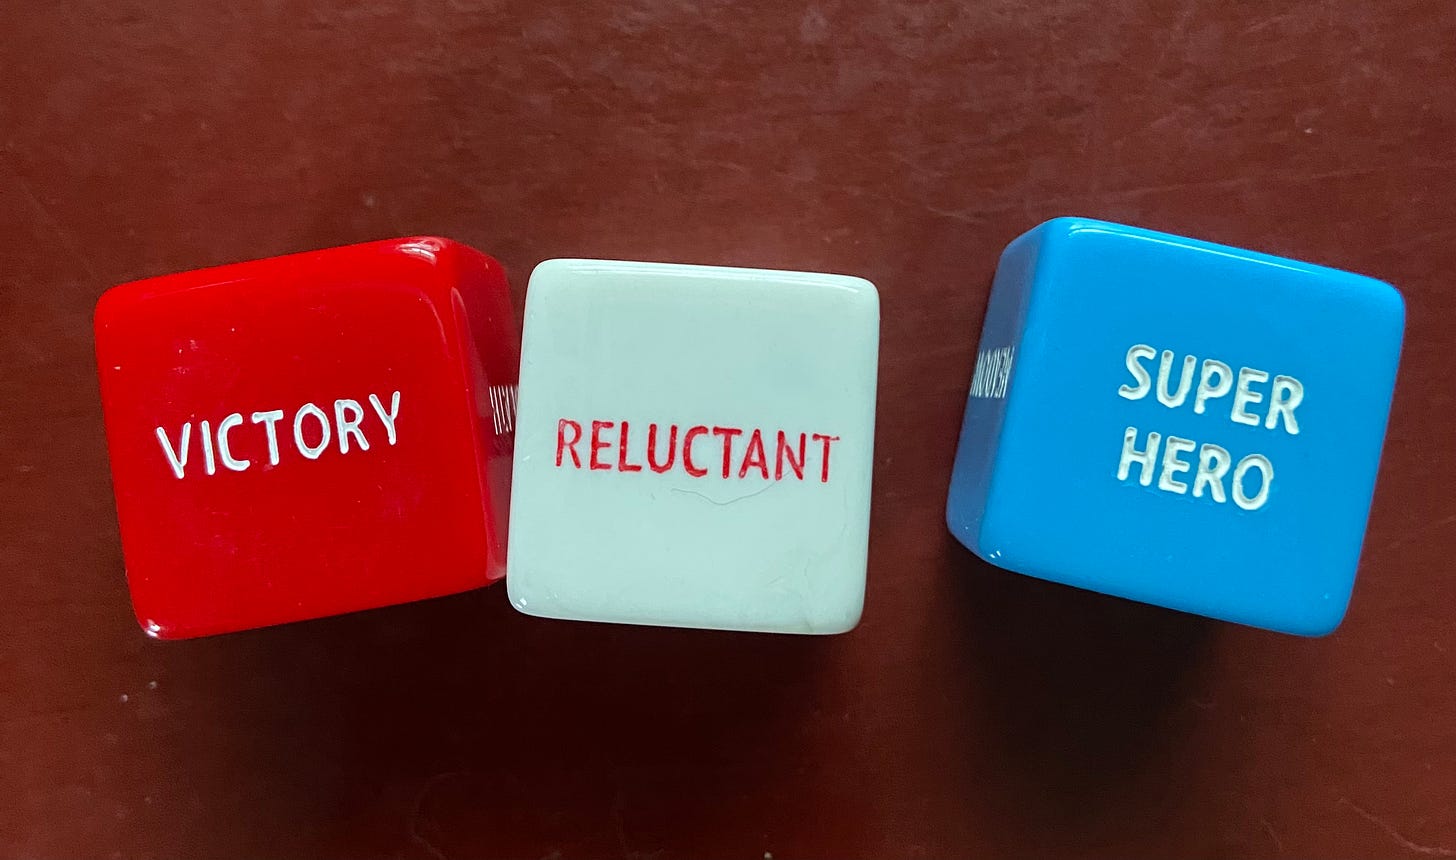 A red dice that says, VICTORY, a white dice that says RELUCTANT, and a blue dice that says SUPER HERO